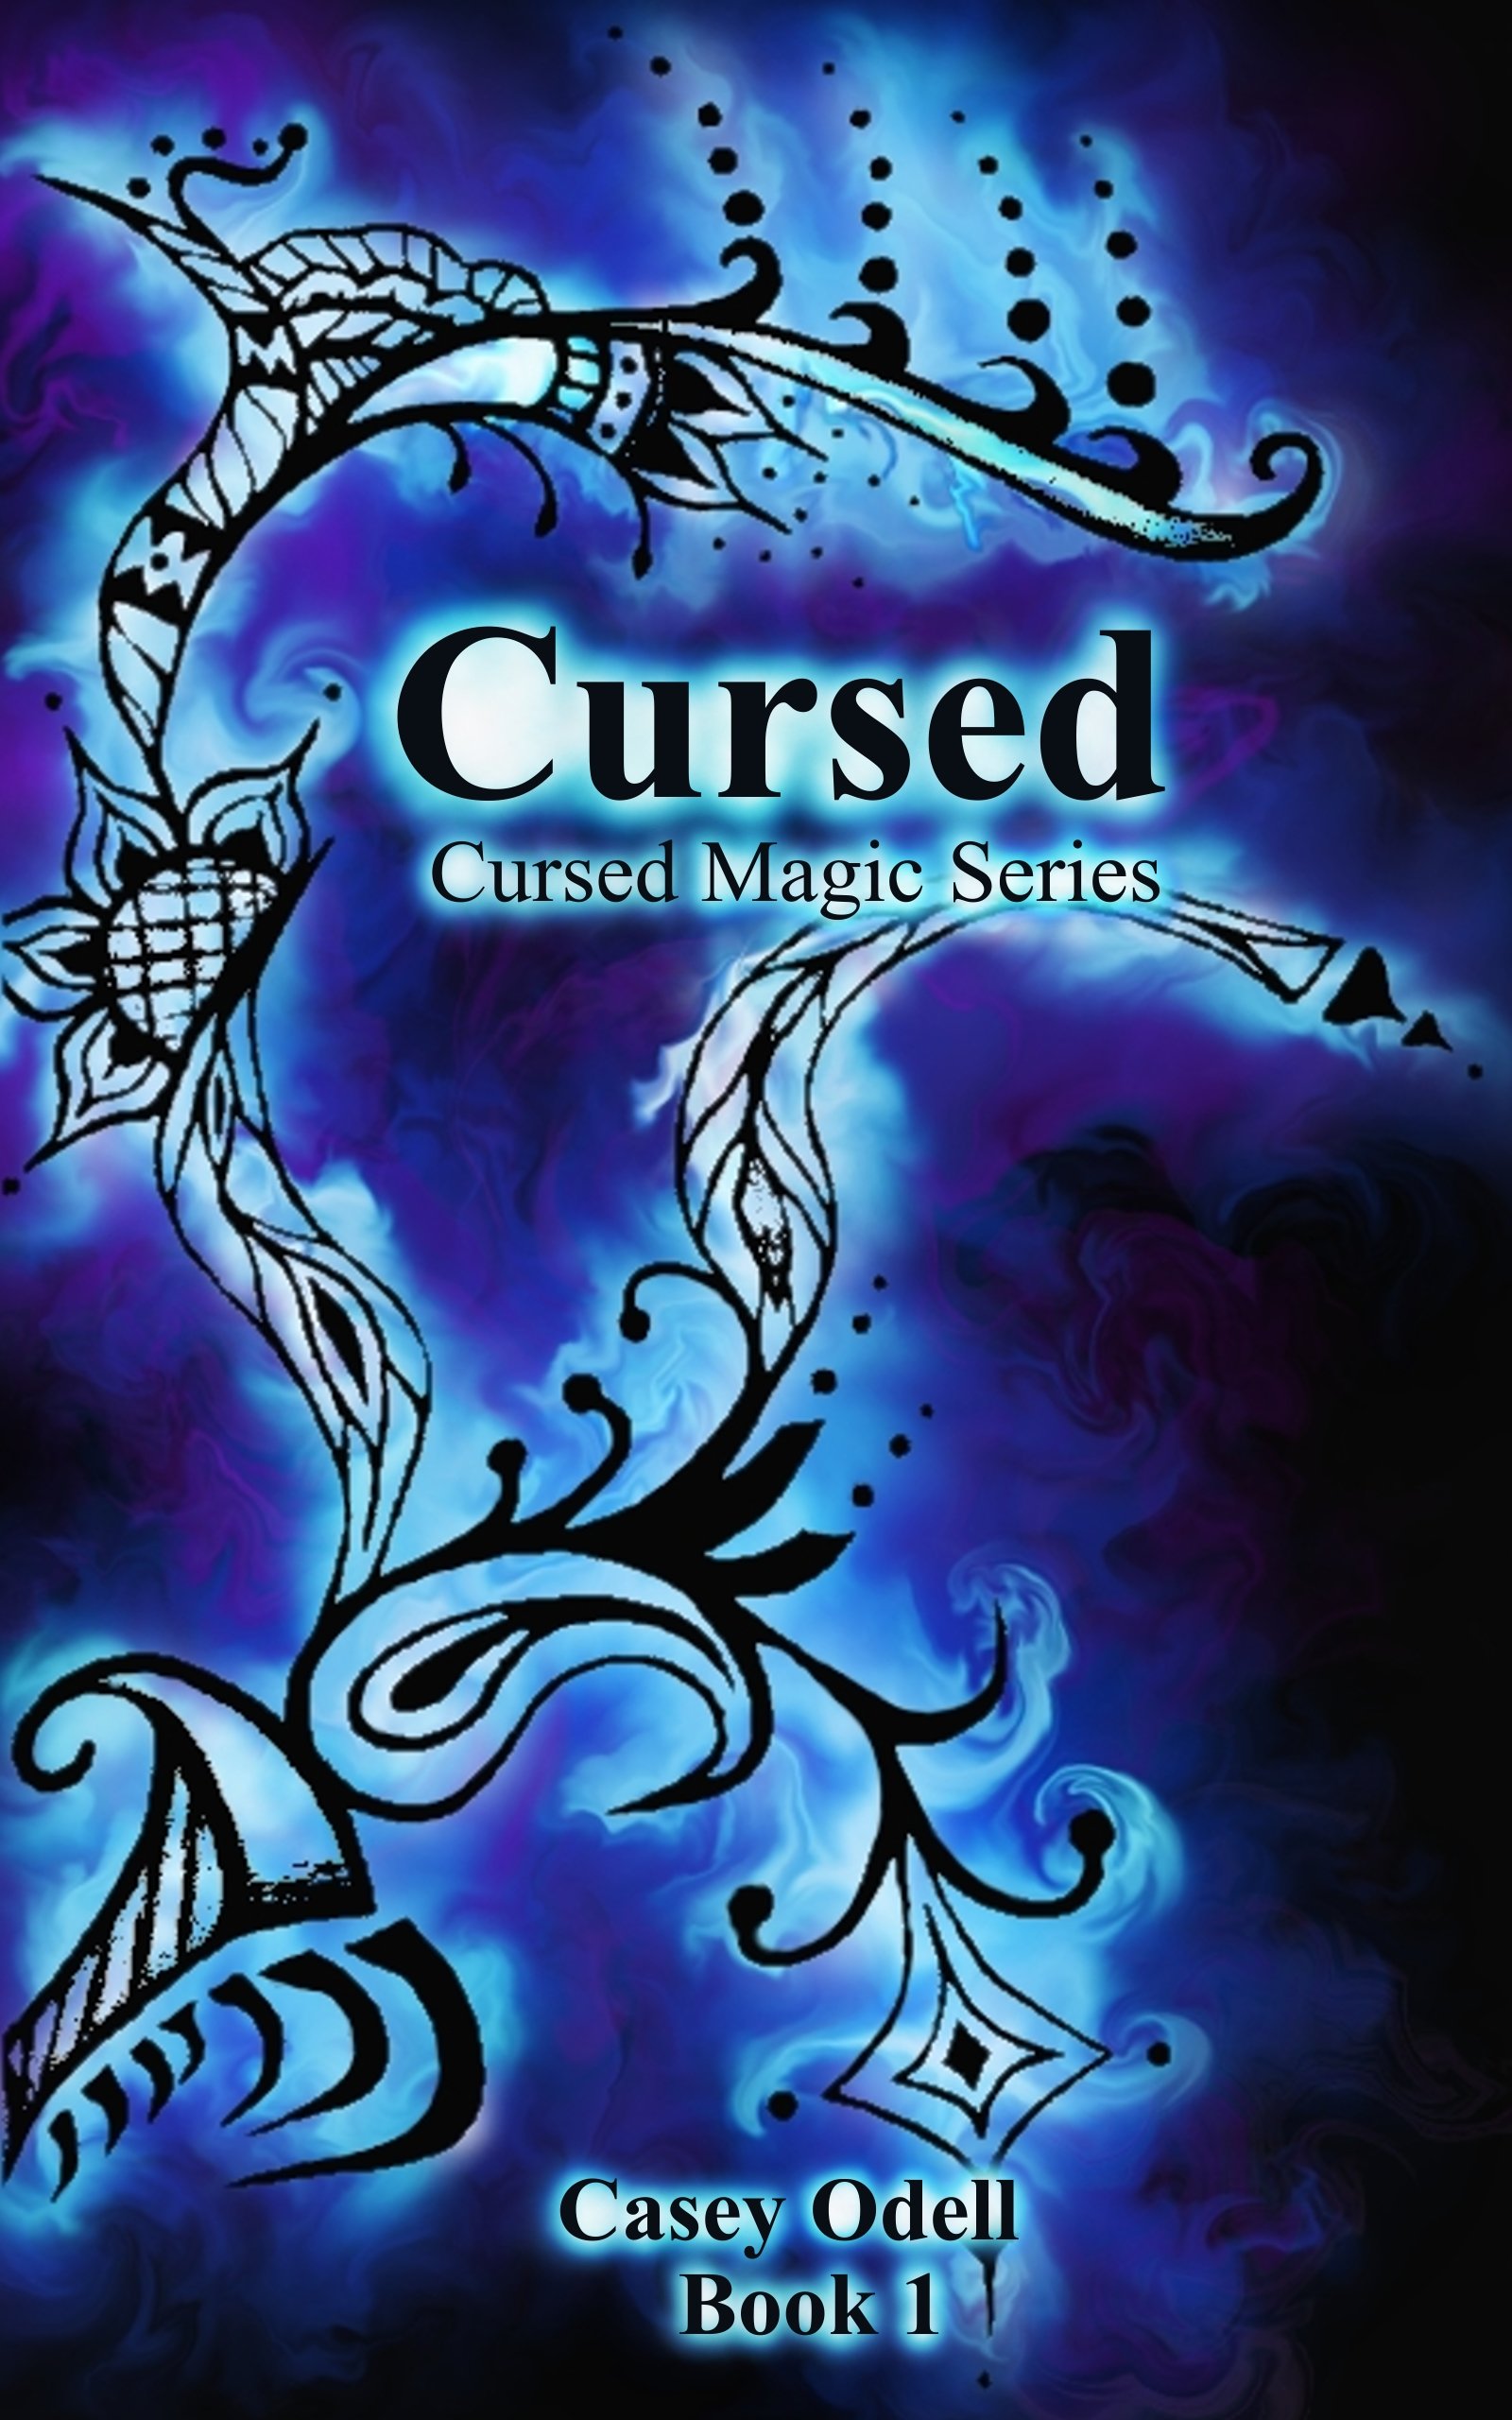 Casey odell: the cursed magic series